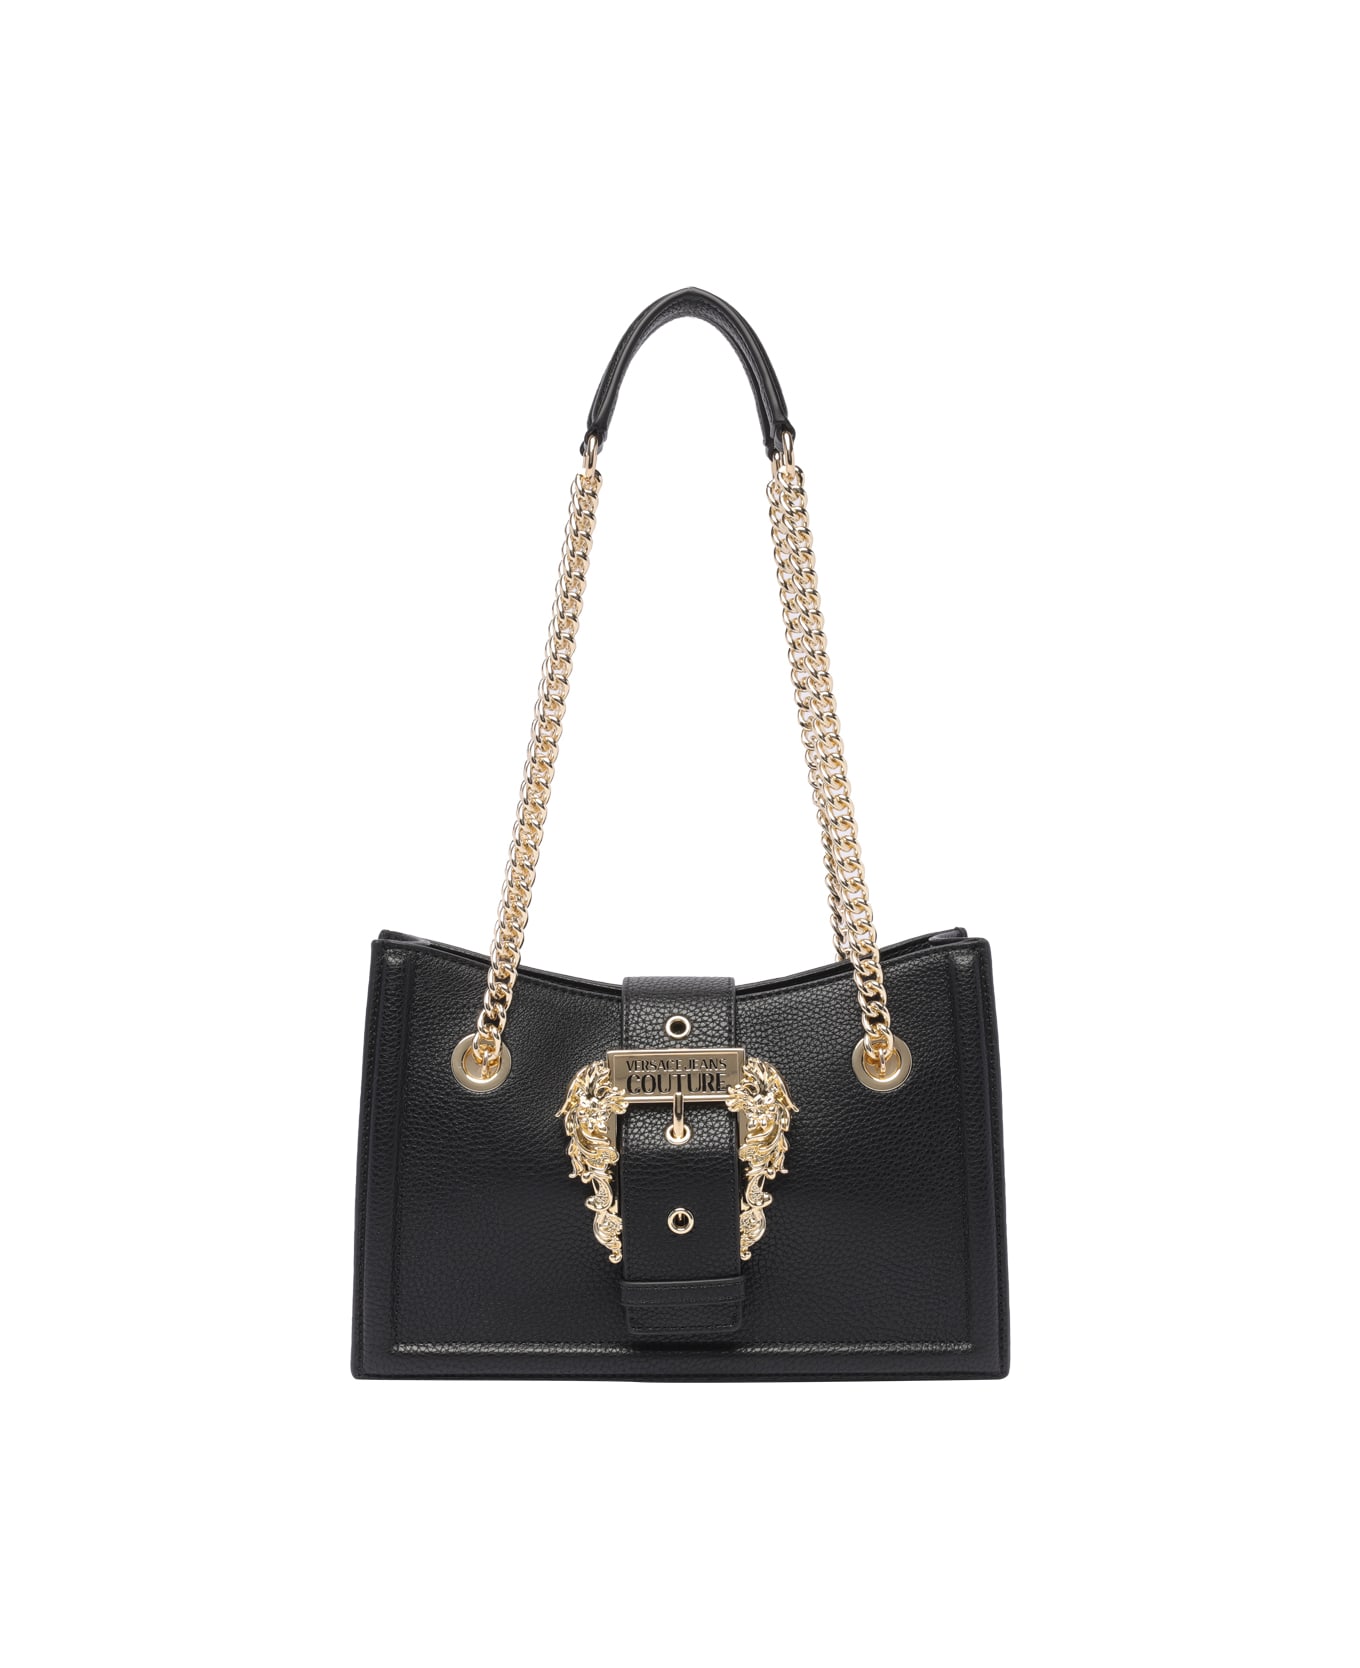 Versace Jeans Couture Embossed Buckle Bag - Black トートバッグ